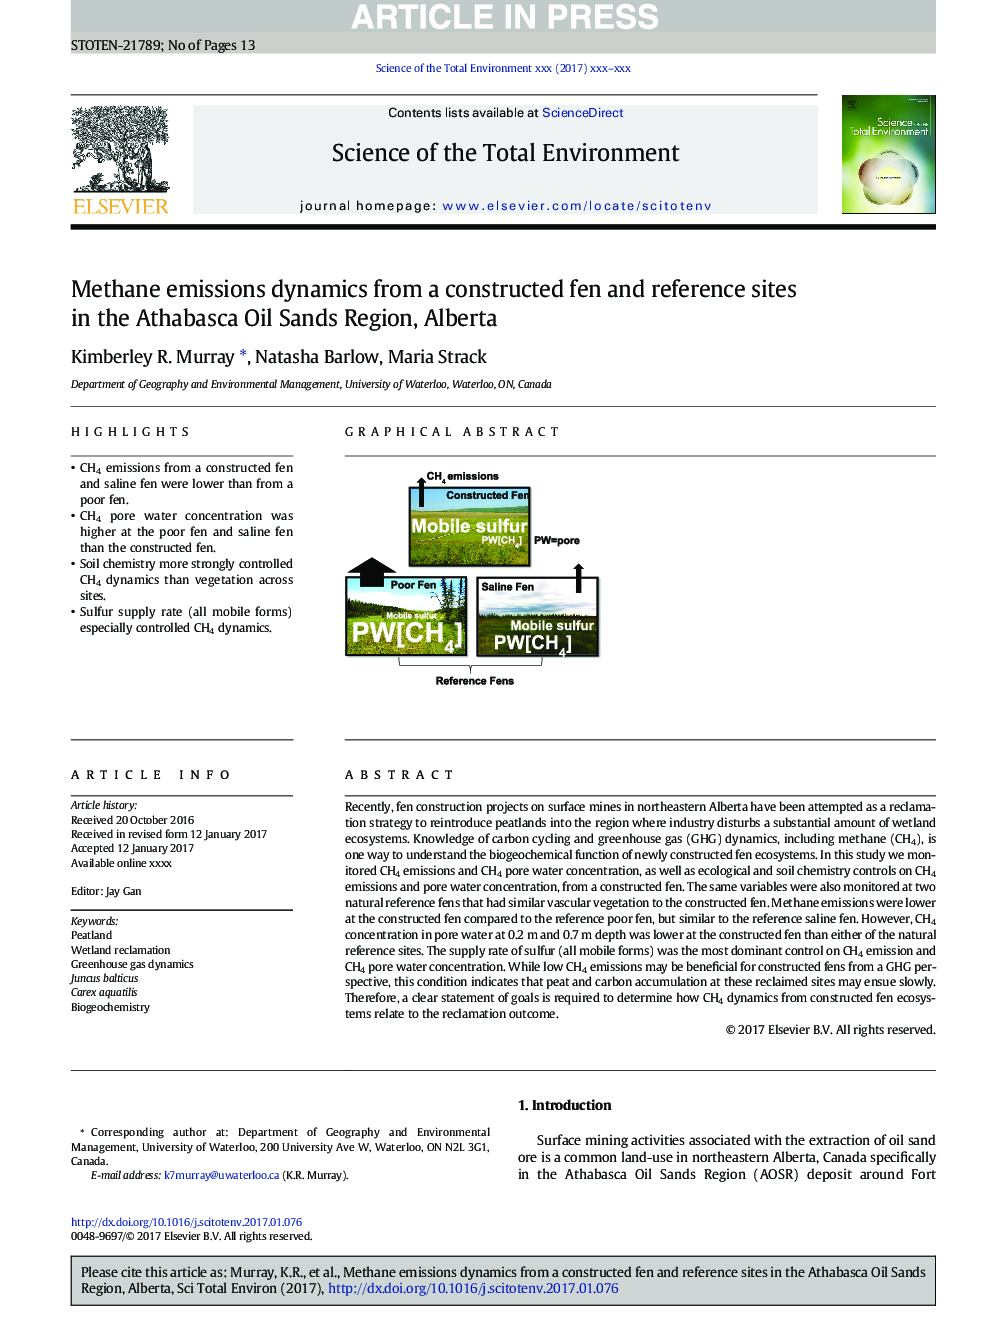 Methane emissions dynamics from a constructed fen and reference sites in the Athabasca Oil Sands Region, Alberta